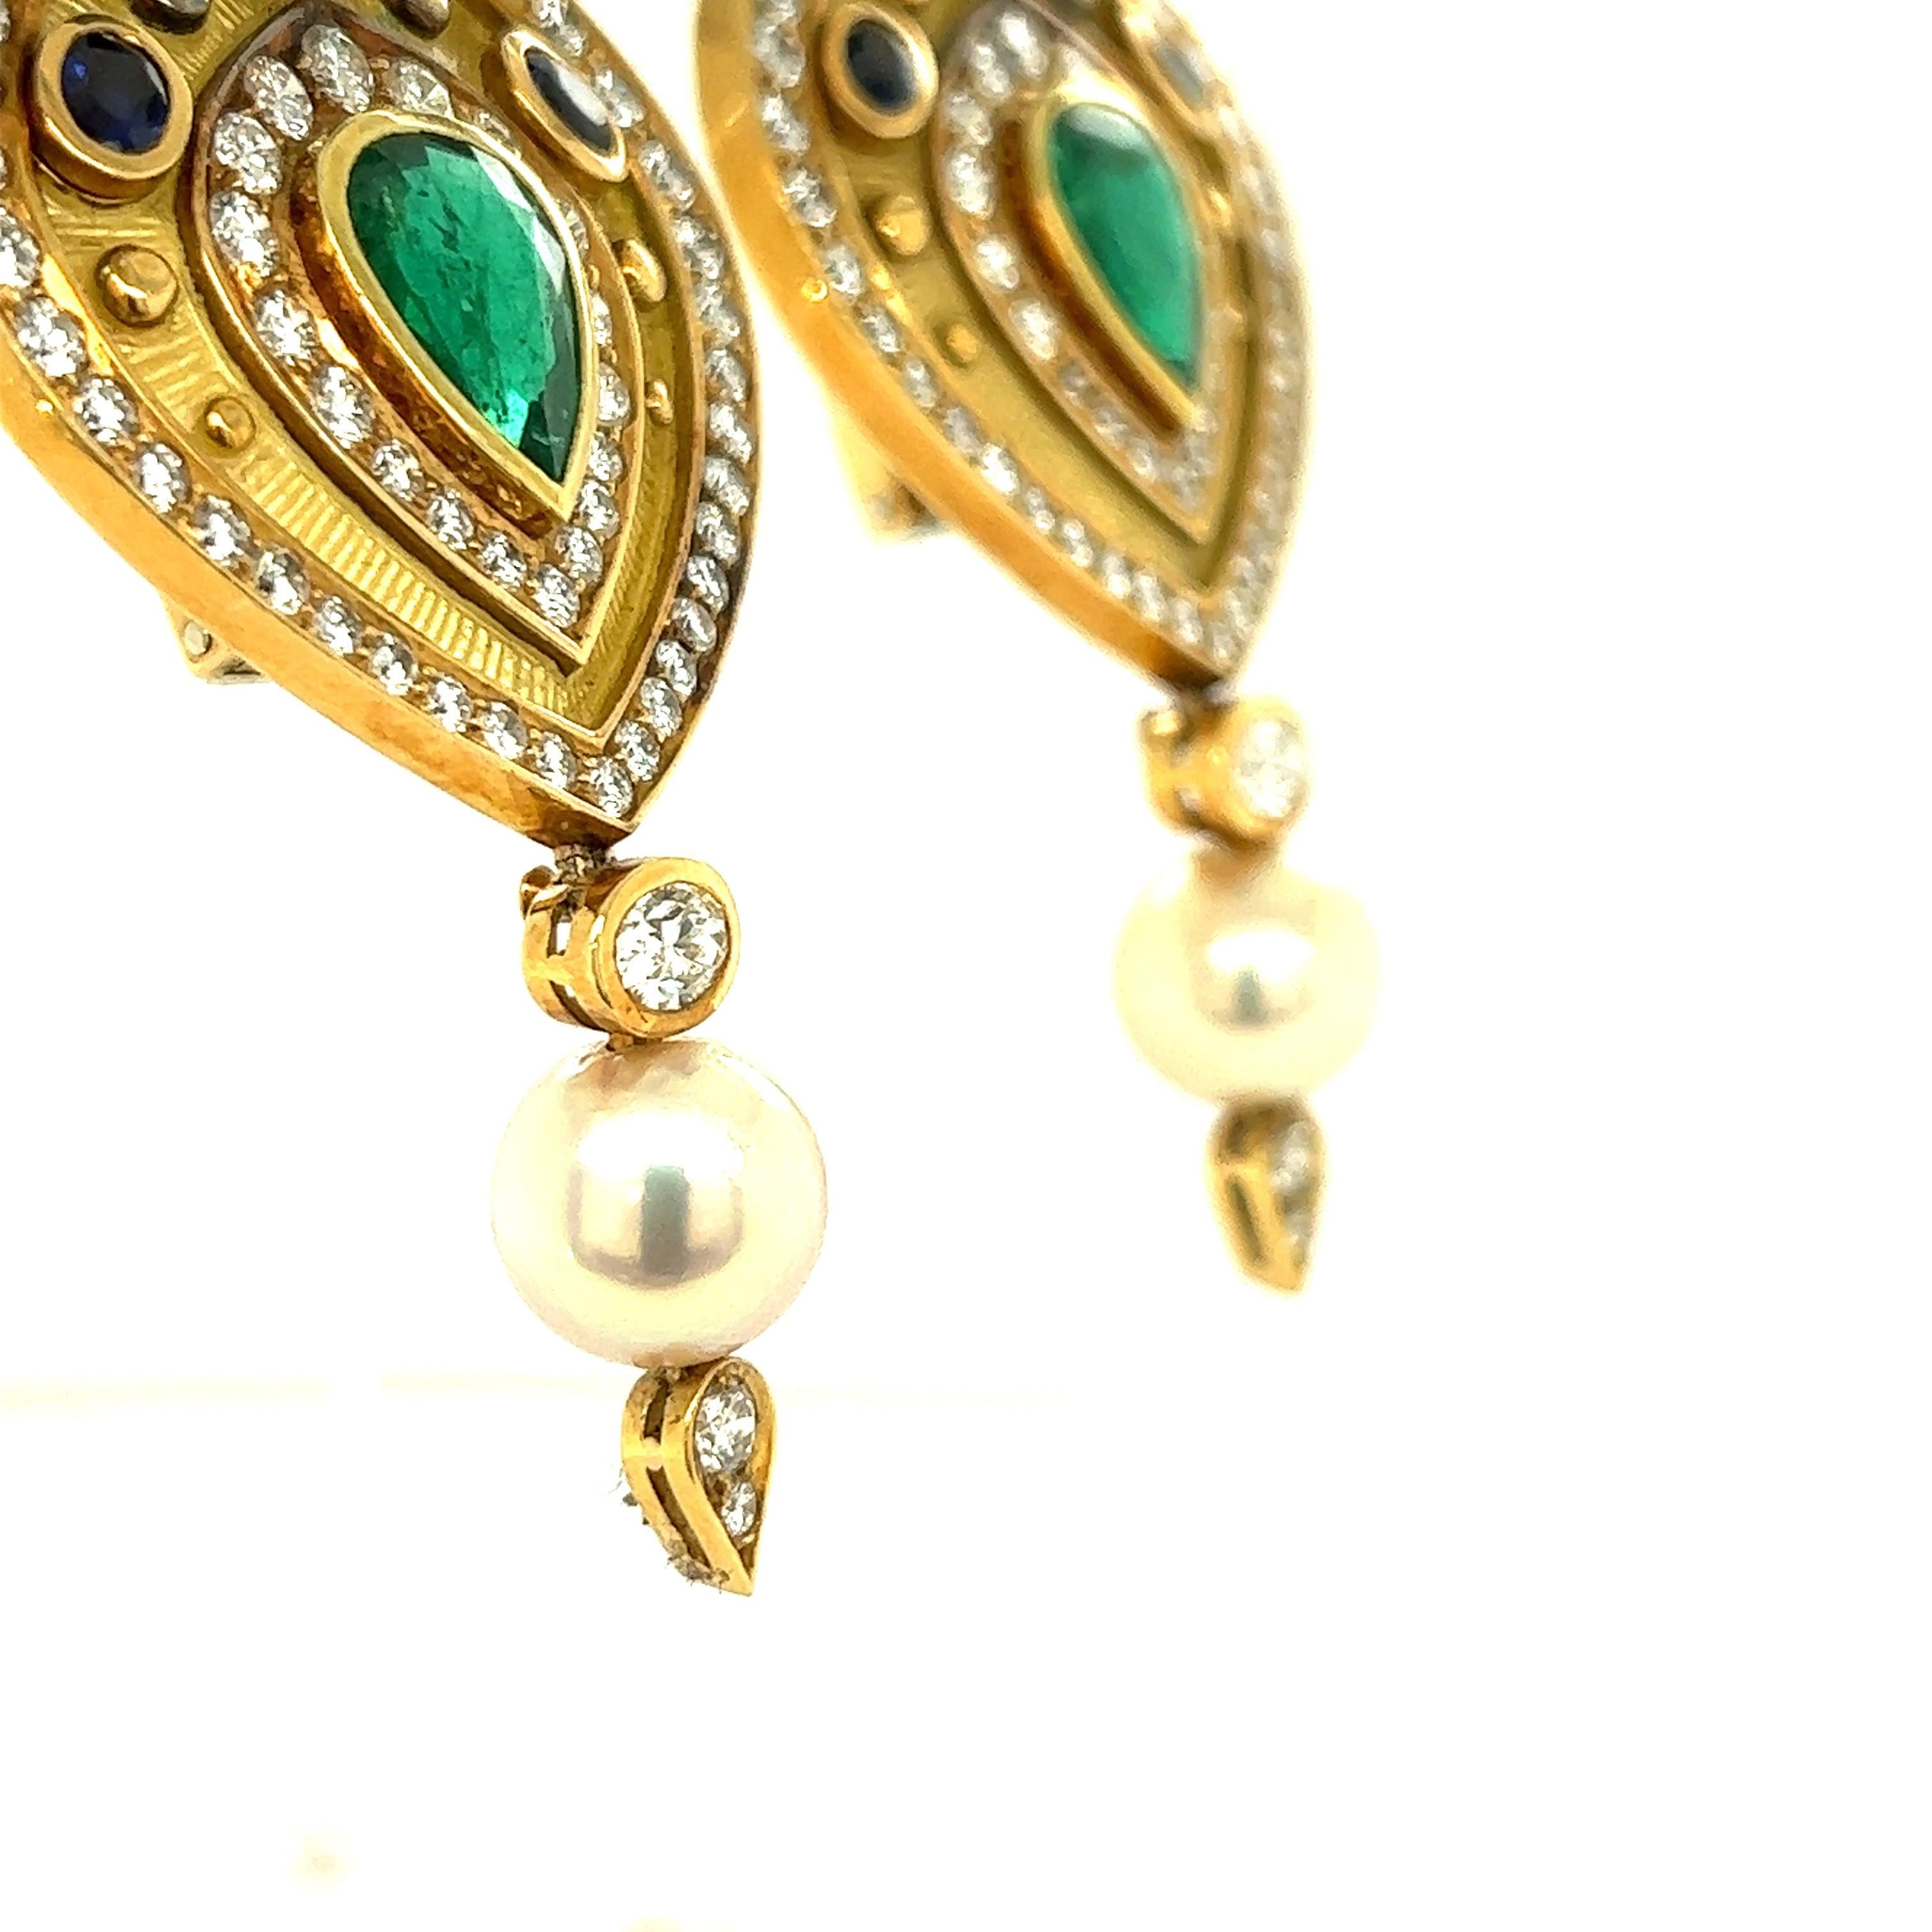 Mixed Cut Pear Shaped Emerald, Diamond, and Sapphire 18k Yellow Gold Earrings For Sale